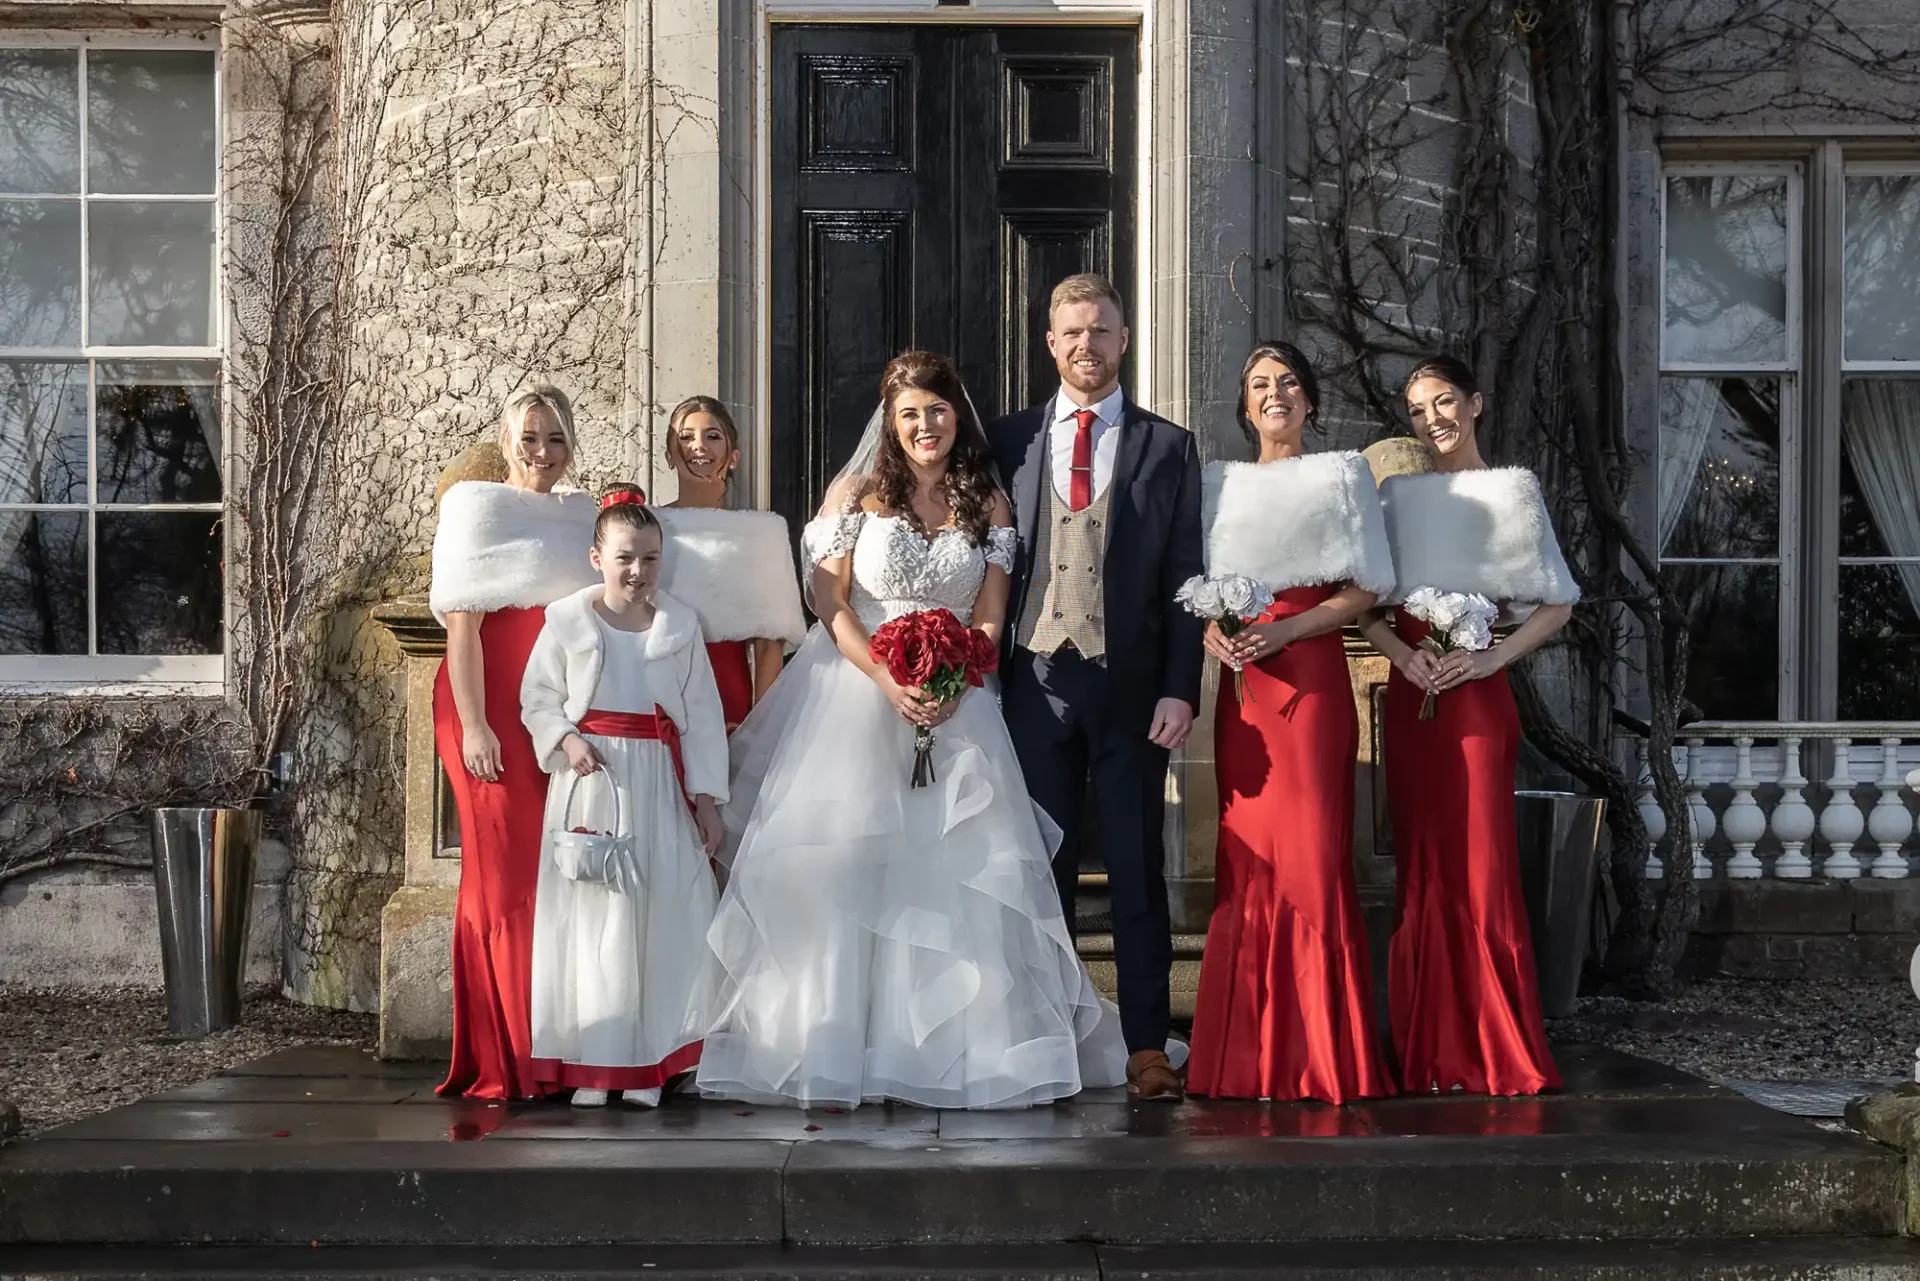 A bride and groom stand with five bridesmaids outside a historical building, all dressed in formal attire.